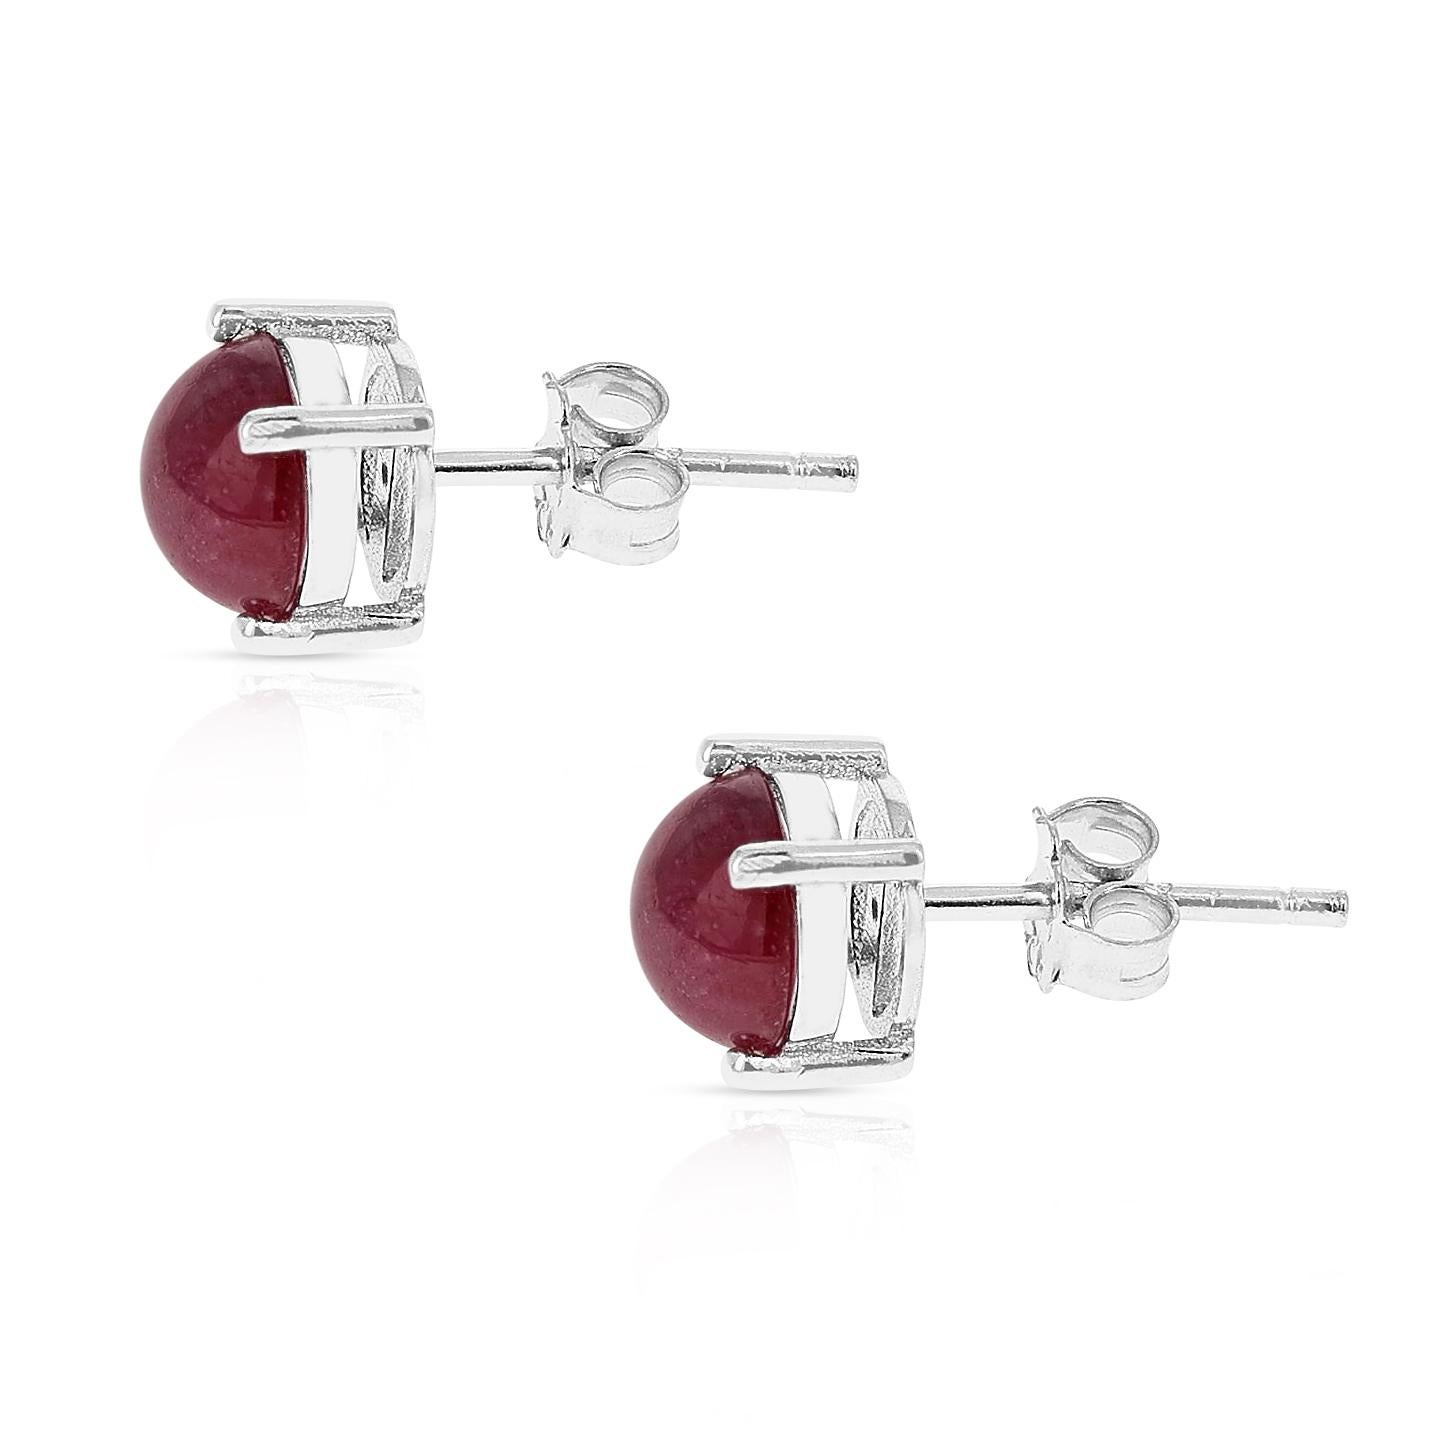 Round Cut Genuine Ruby Round Cabochon Stud Earrings, Sterling Silver